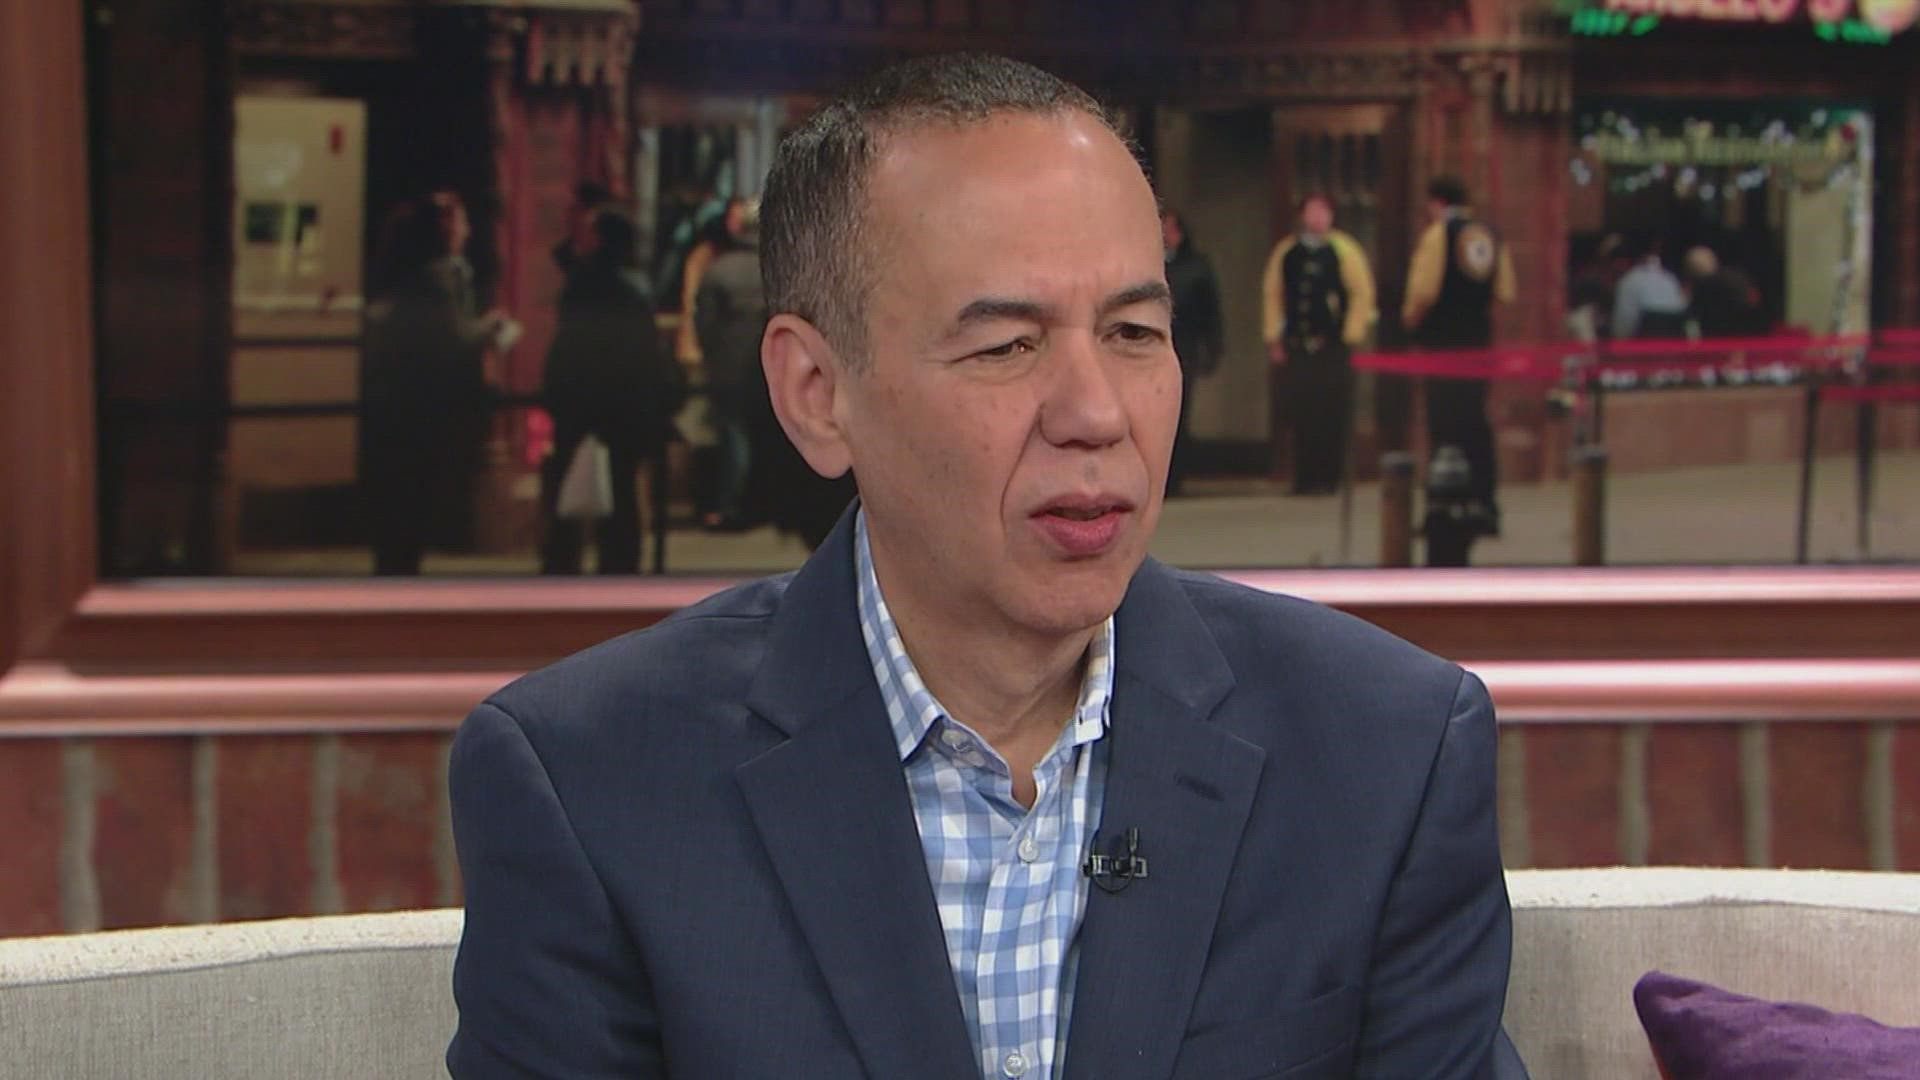 Legendary comedian and actor Gilbert Gottfried, known for his shrill-voice and crude humor, has died, his family announced on Tuesday afternoon.